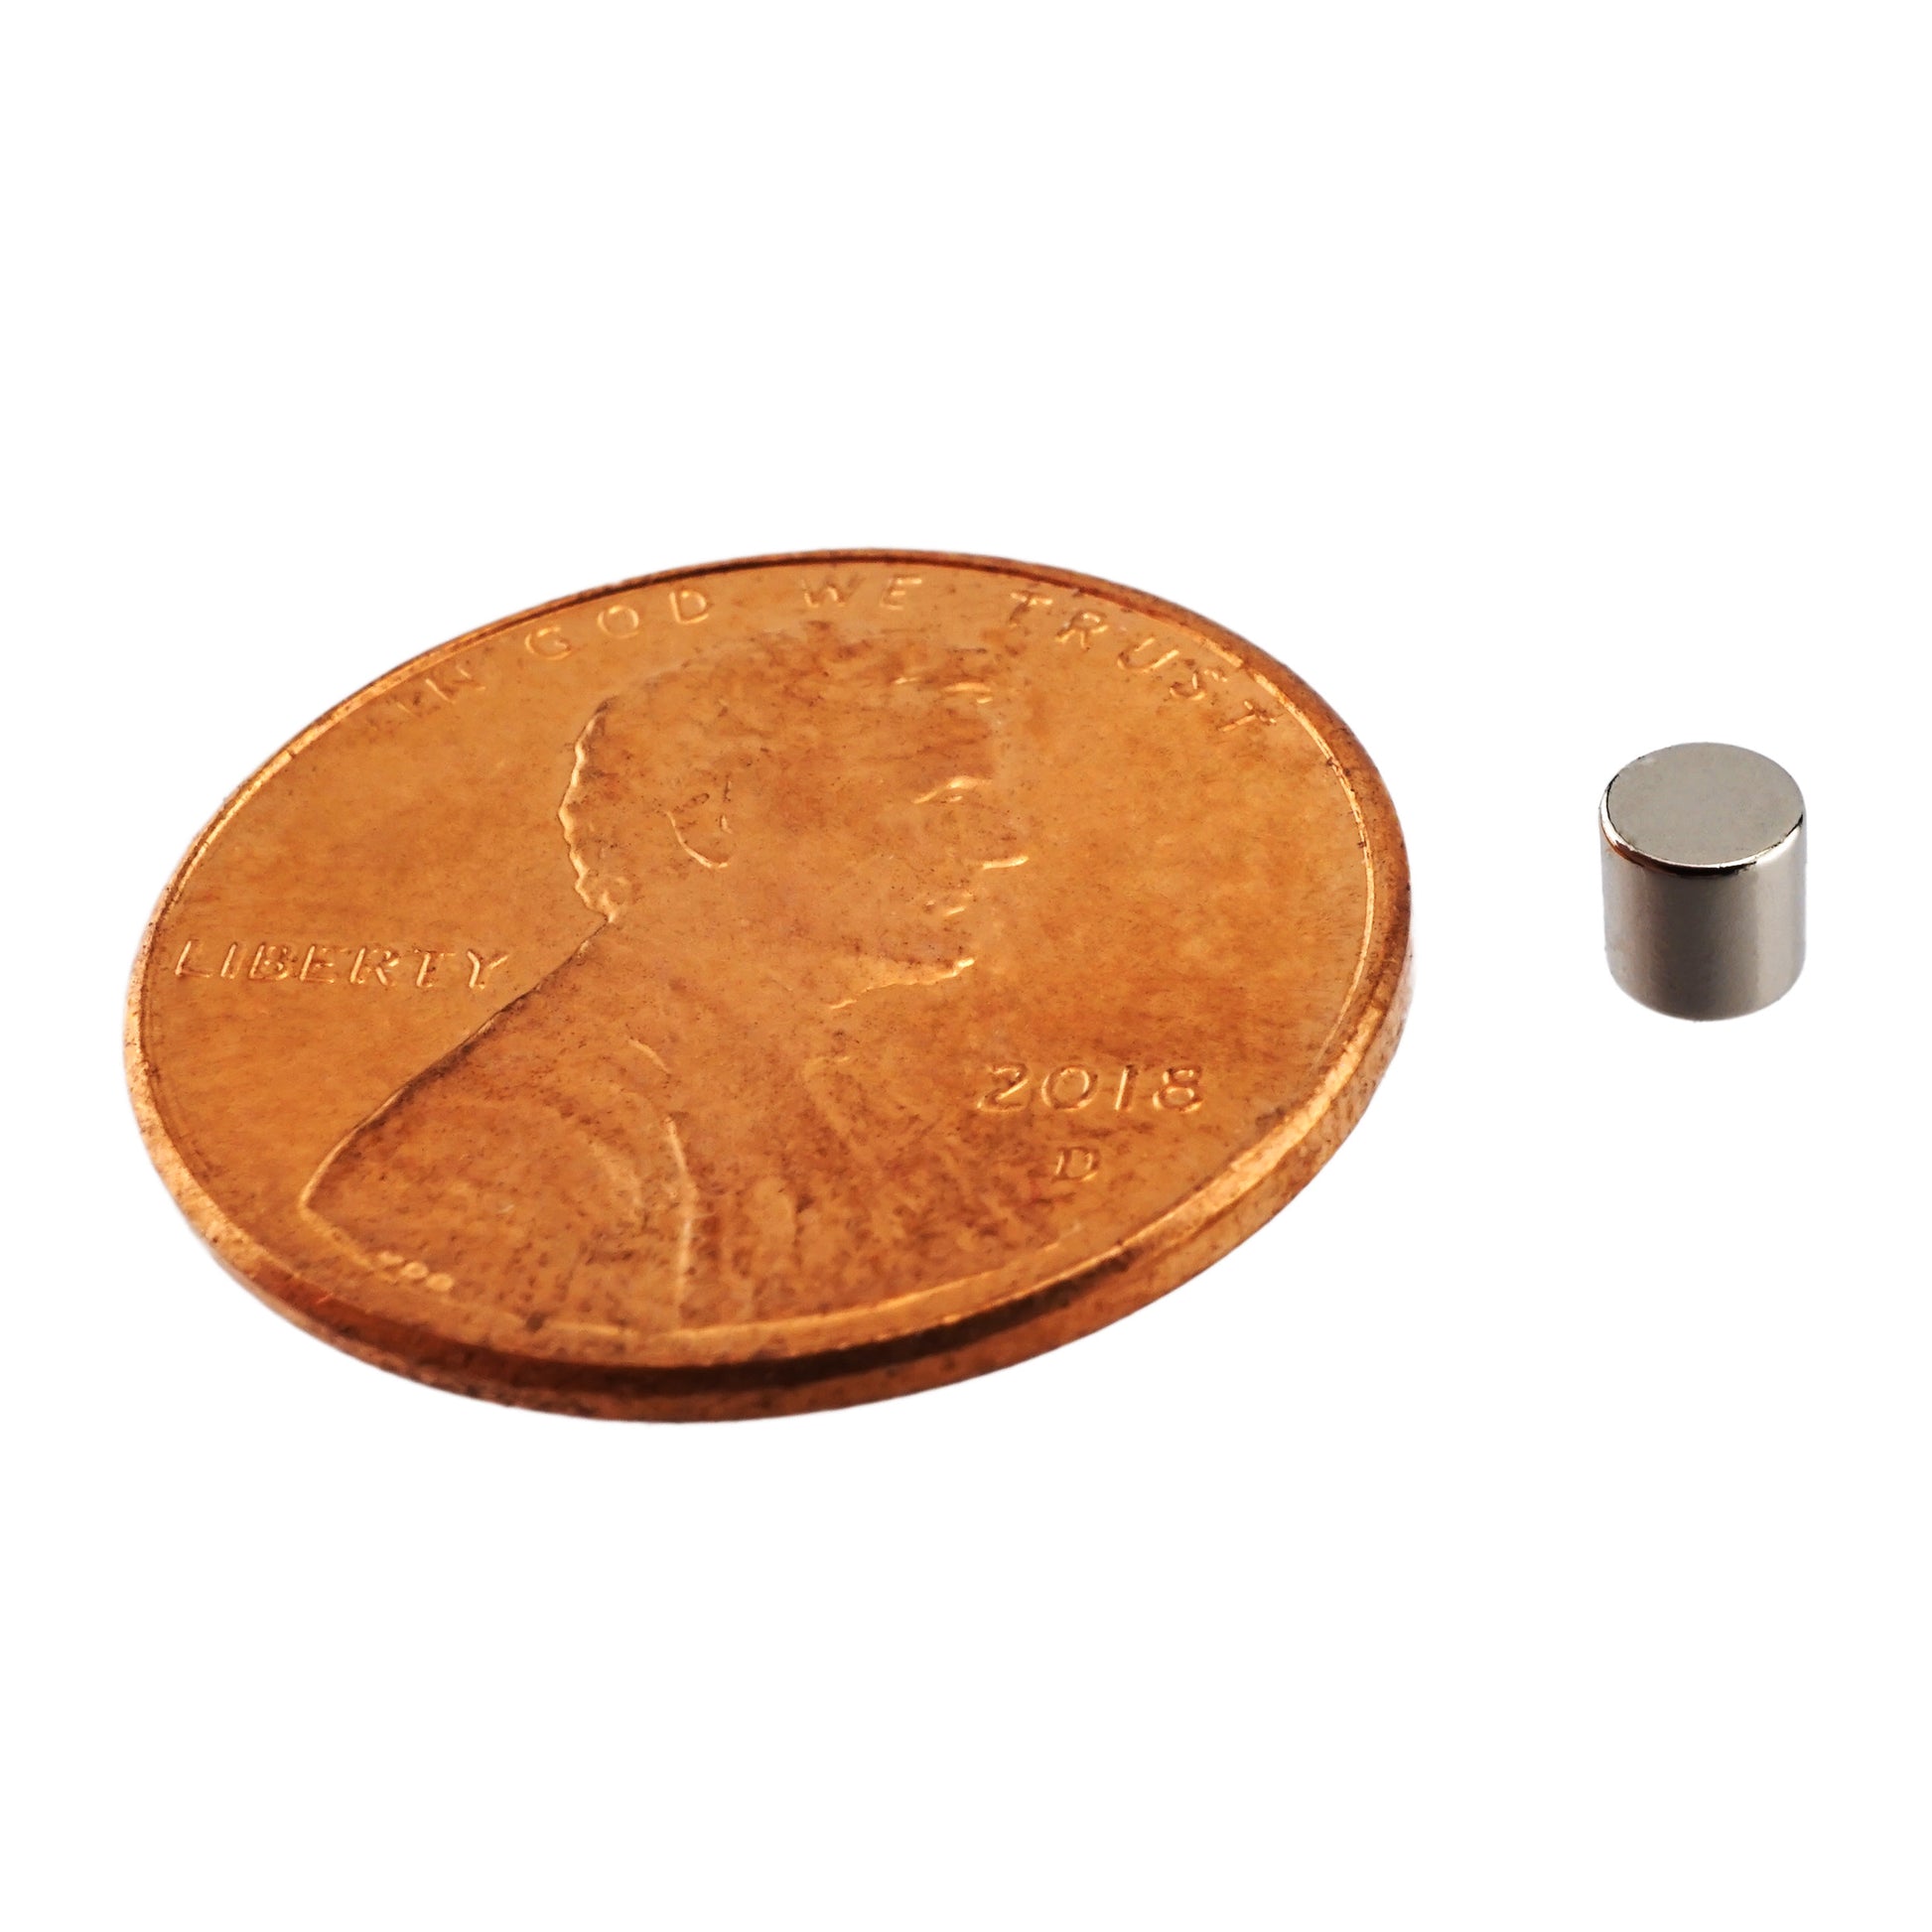 Load image into Gallery viewer, ND001222N Neodymium Disc Magnet - Compared to Penny for Size Reference